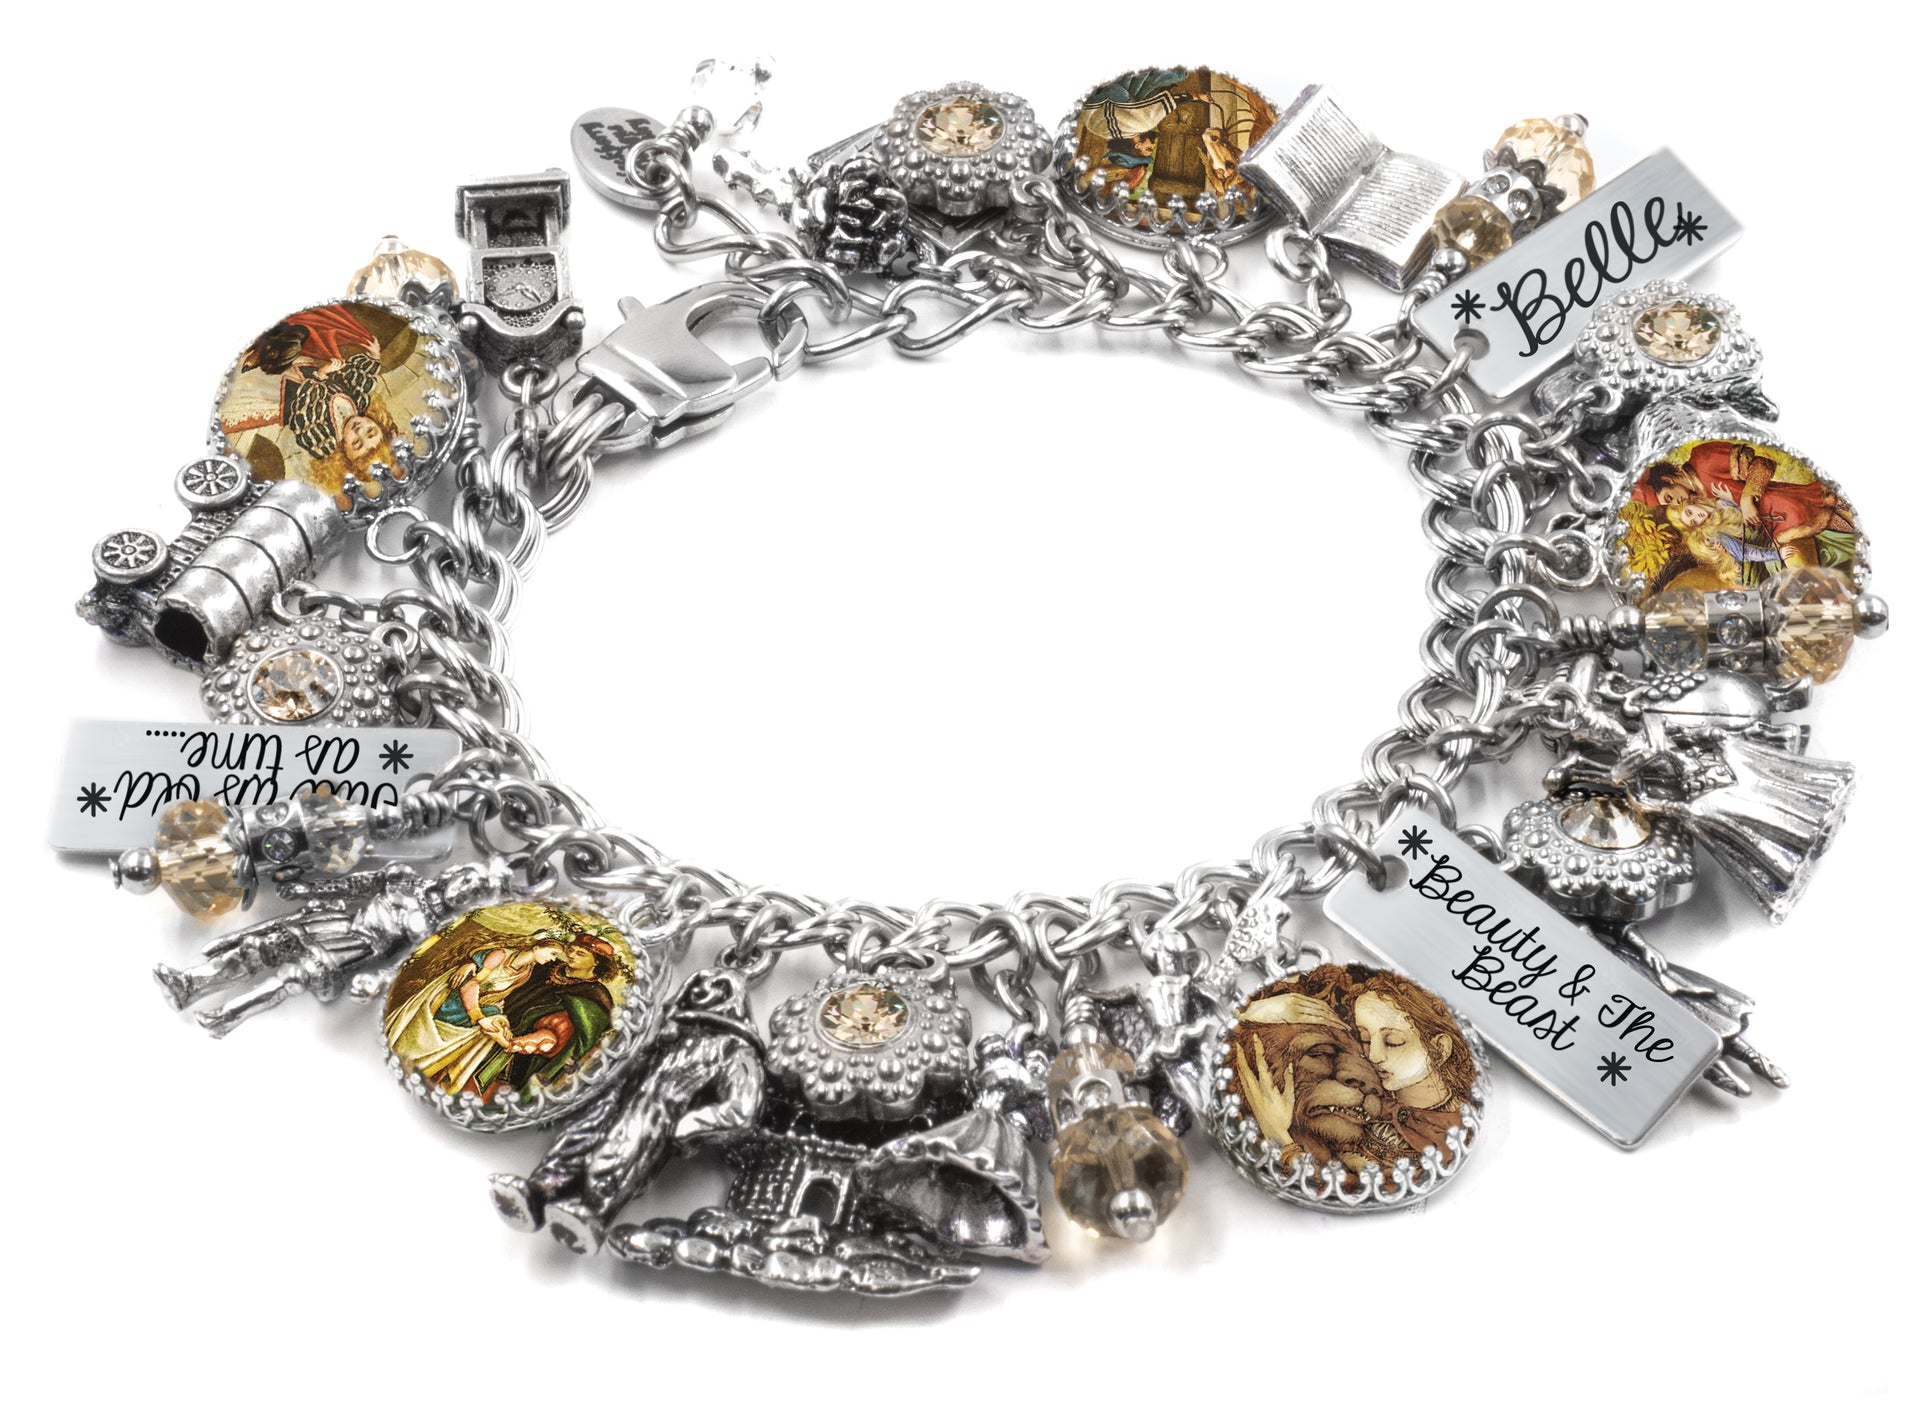 Beauty and the beast charm bracelet with vintage images or Belle